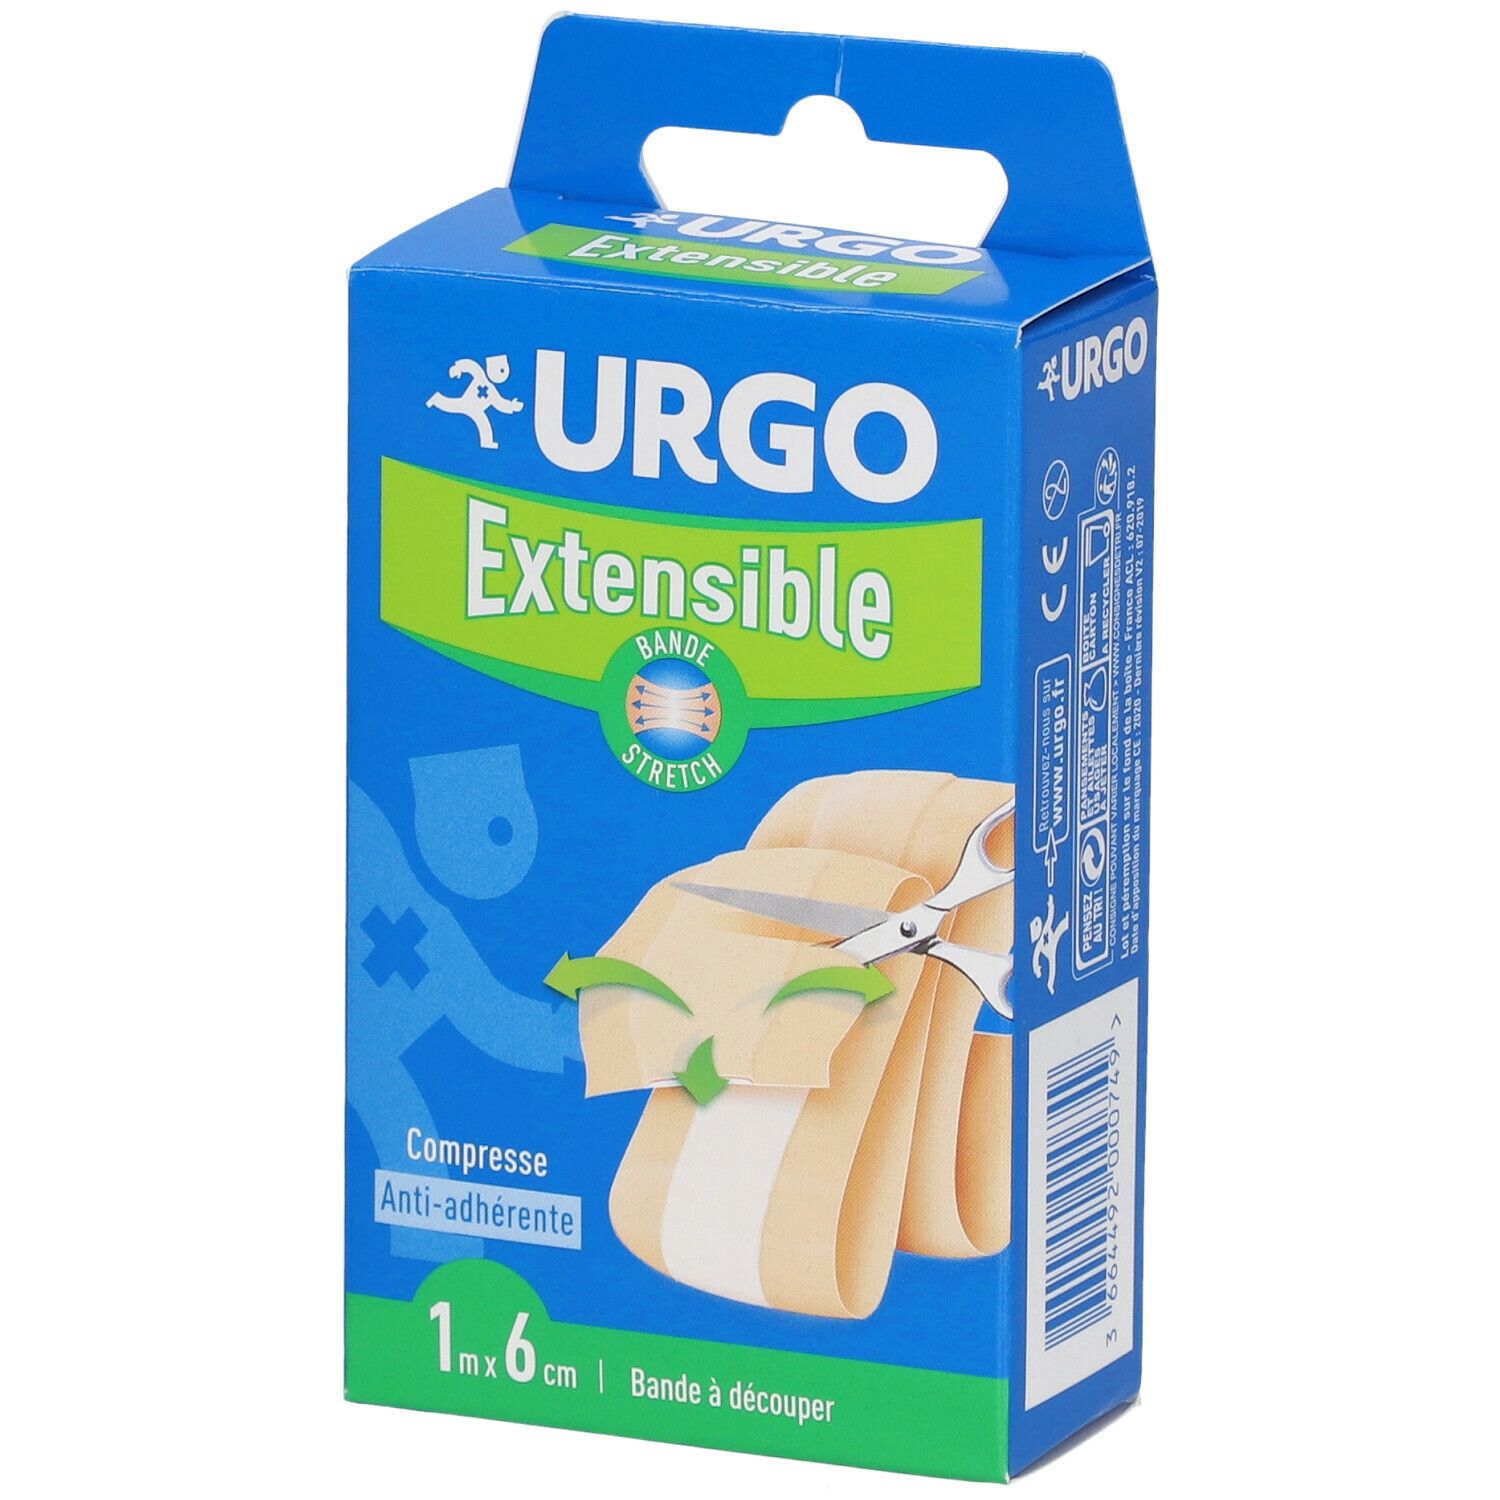 Urgo Extensible Bande Protectrice